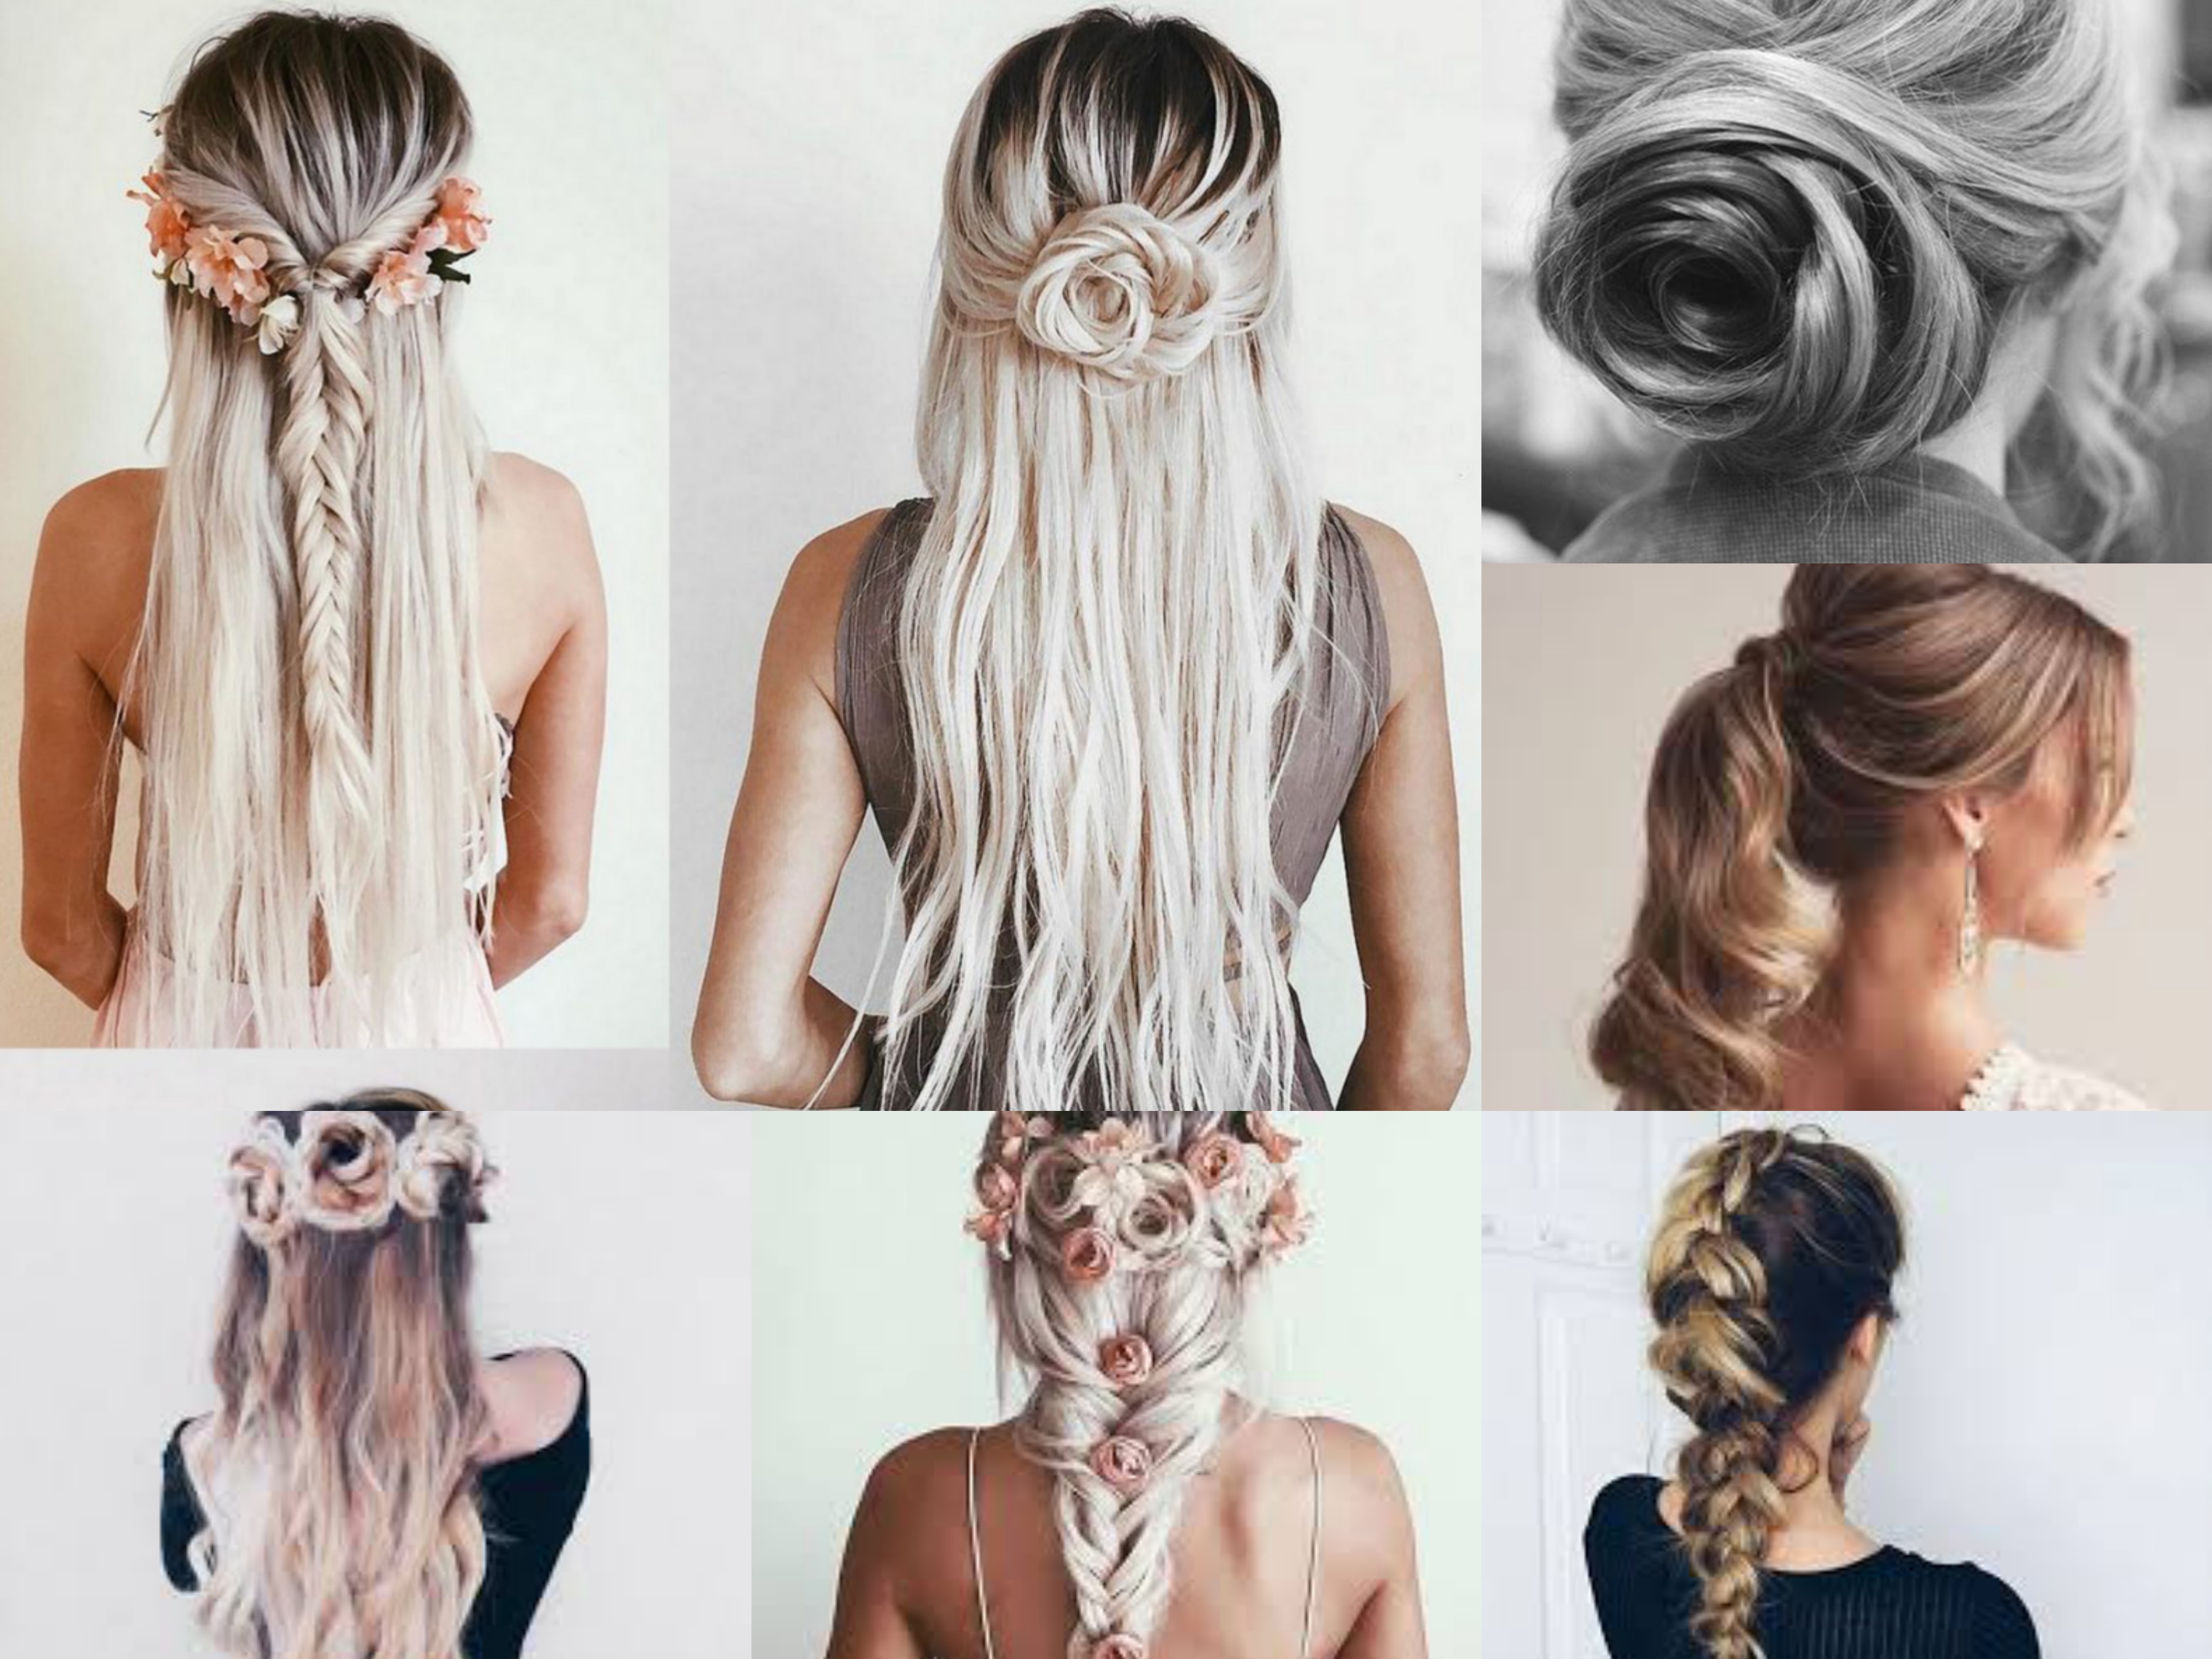 PROM HAIRSTYLE MIX INSPIRATION